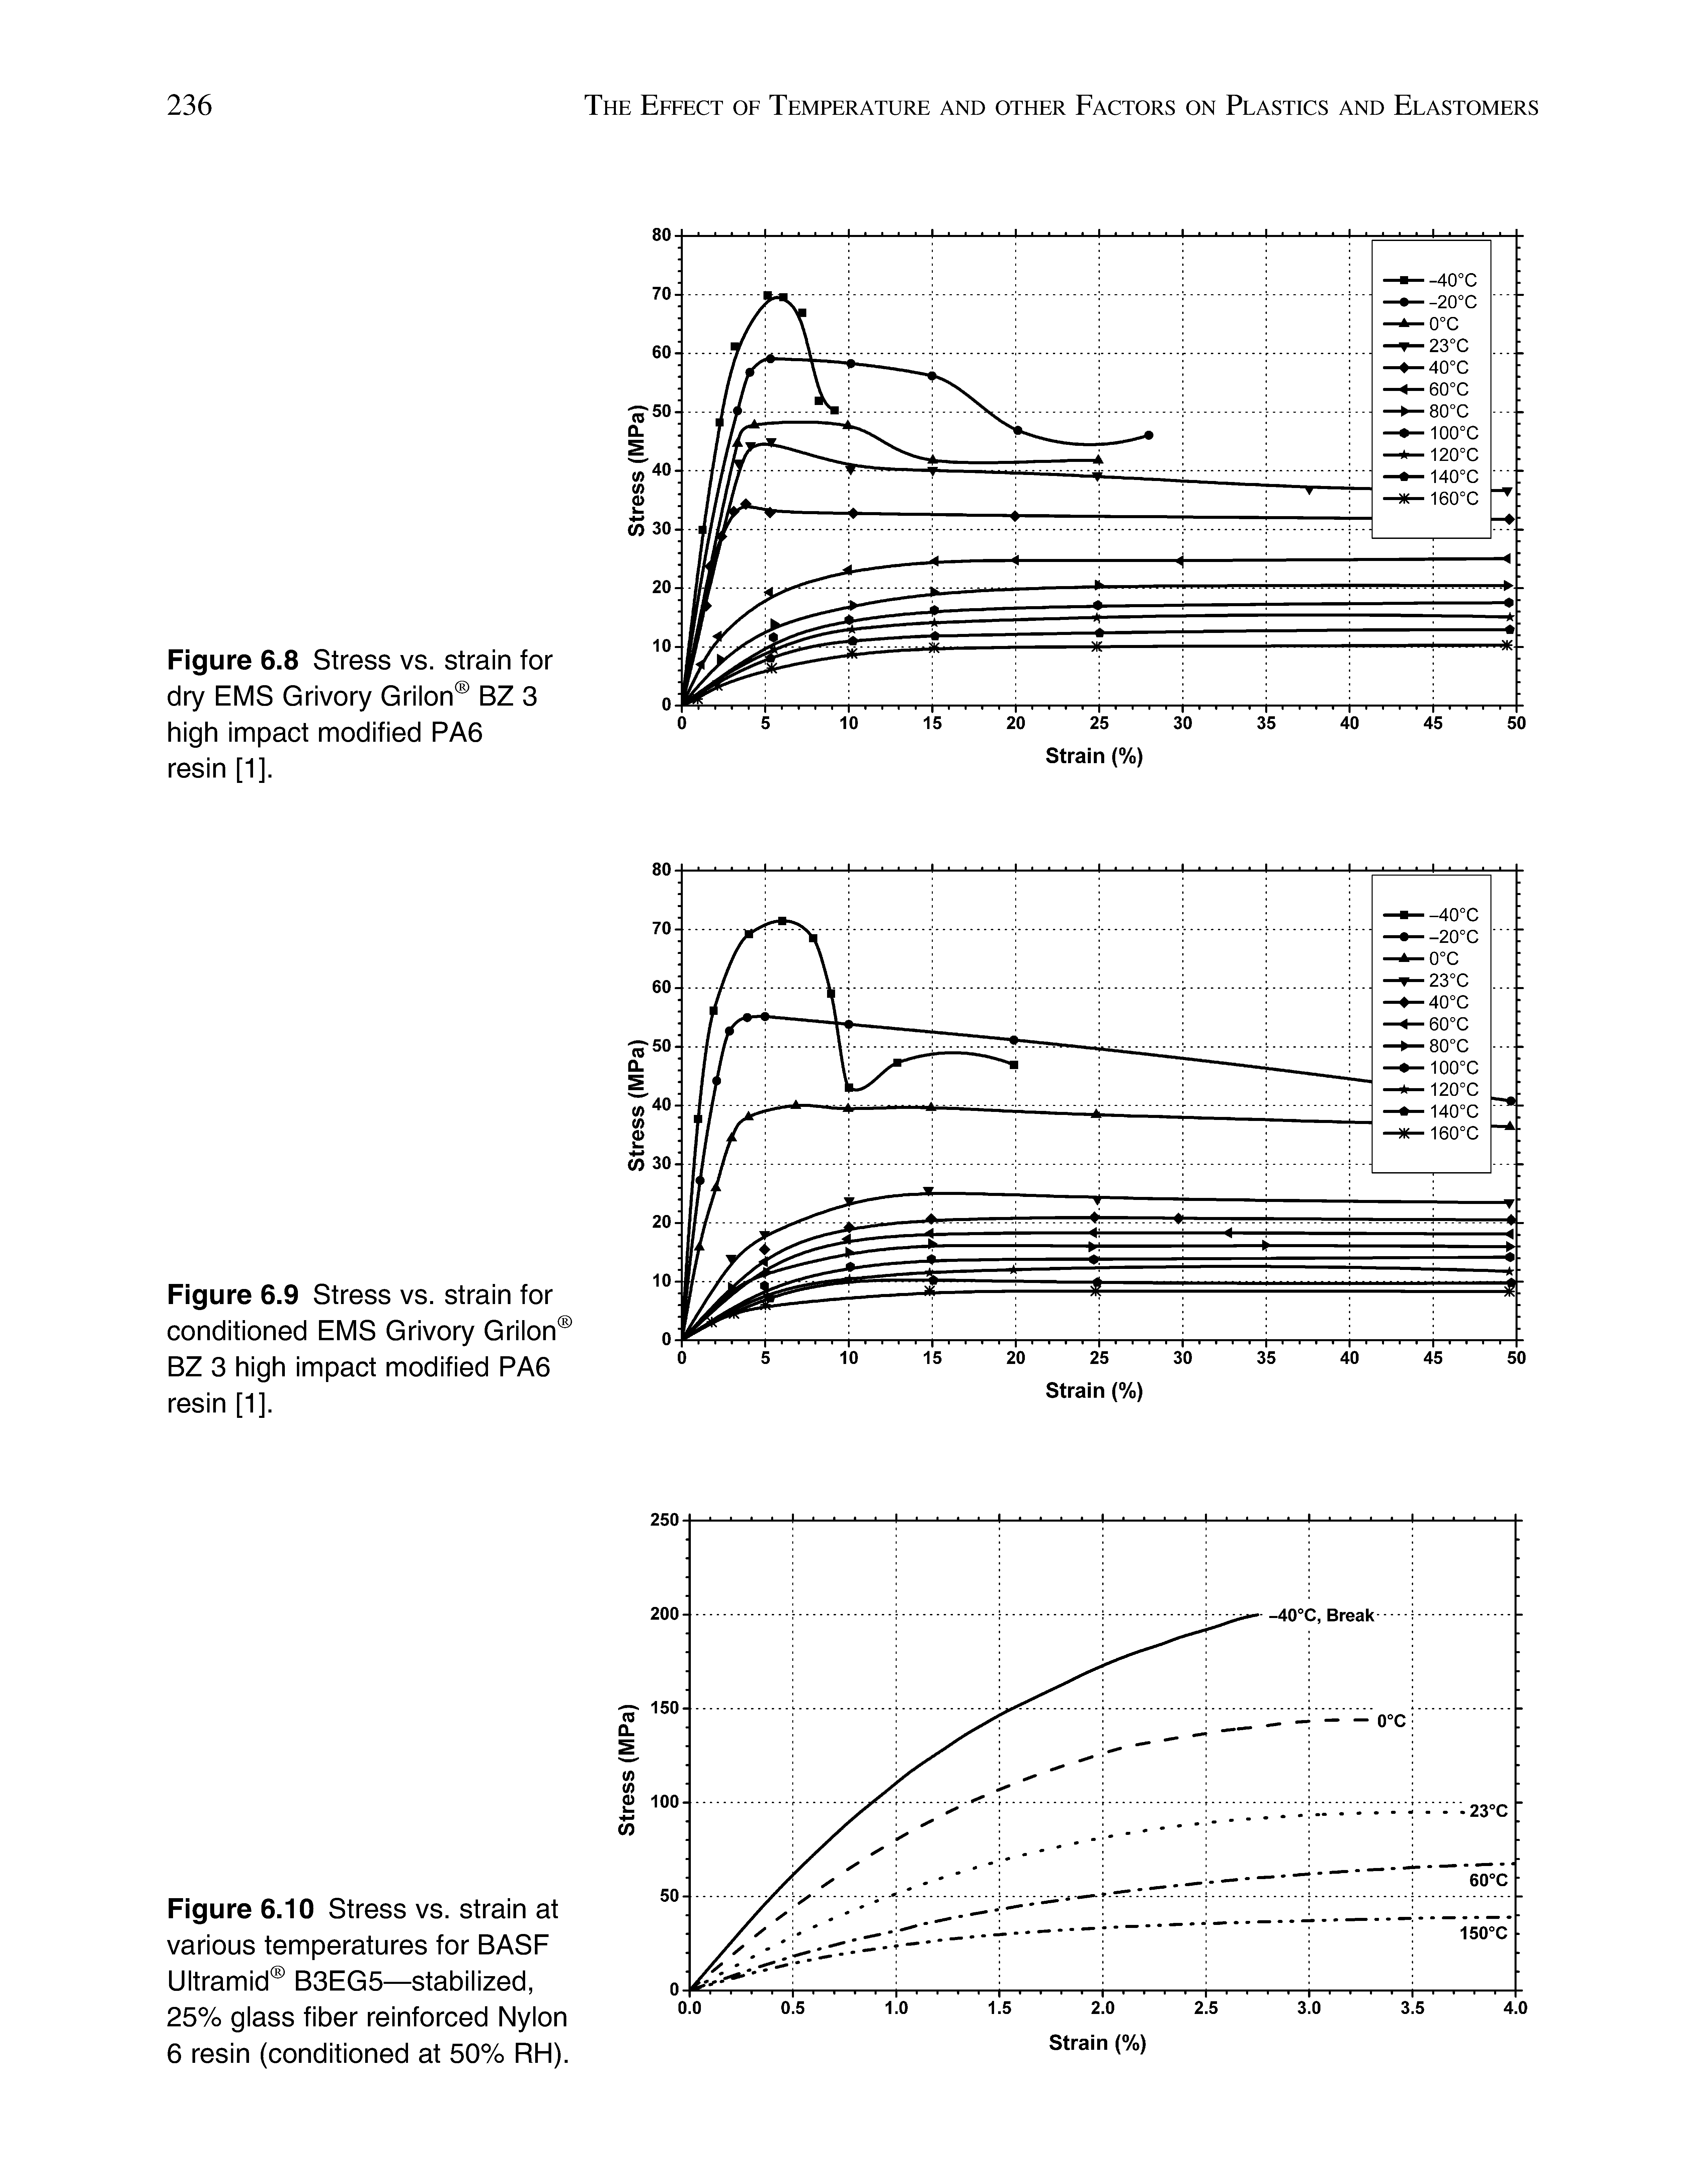 Figure 6.10 Stress vs. strain at various temperatures for BASF Uitramid B3EG5—stabiiized, 25% glass fiber reinforced Nylon 6 resin (conditioned at 50% RH).